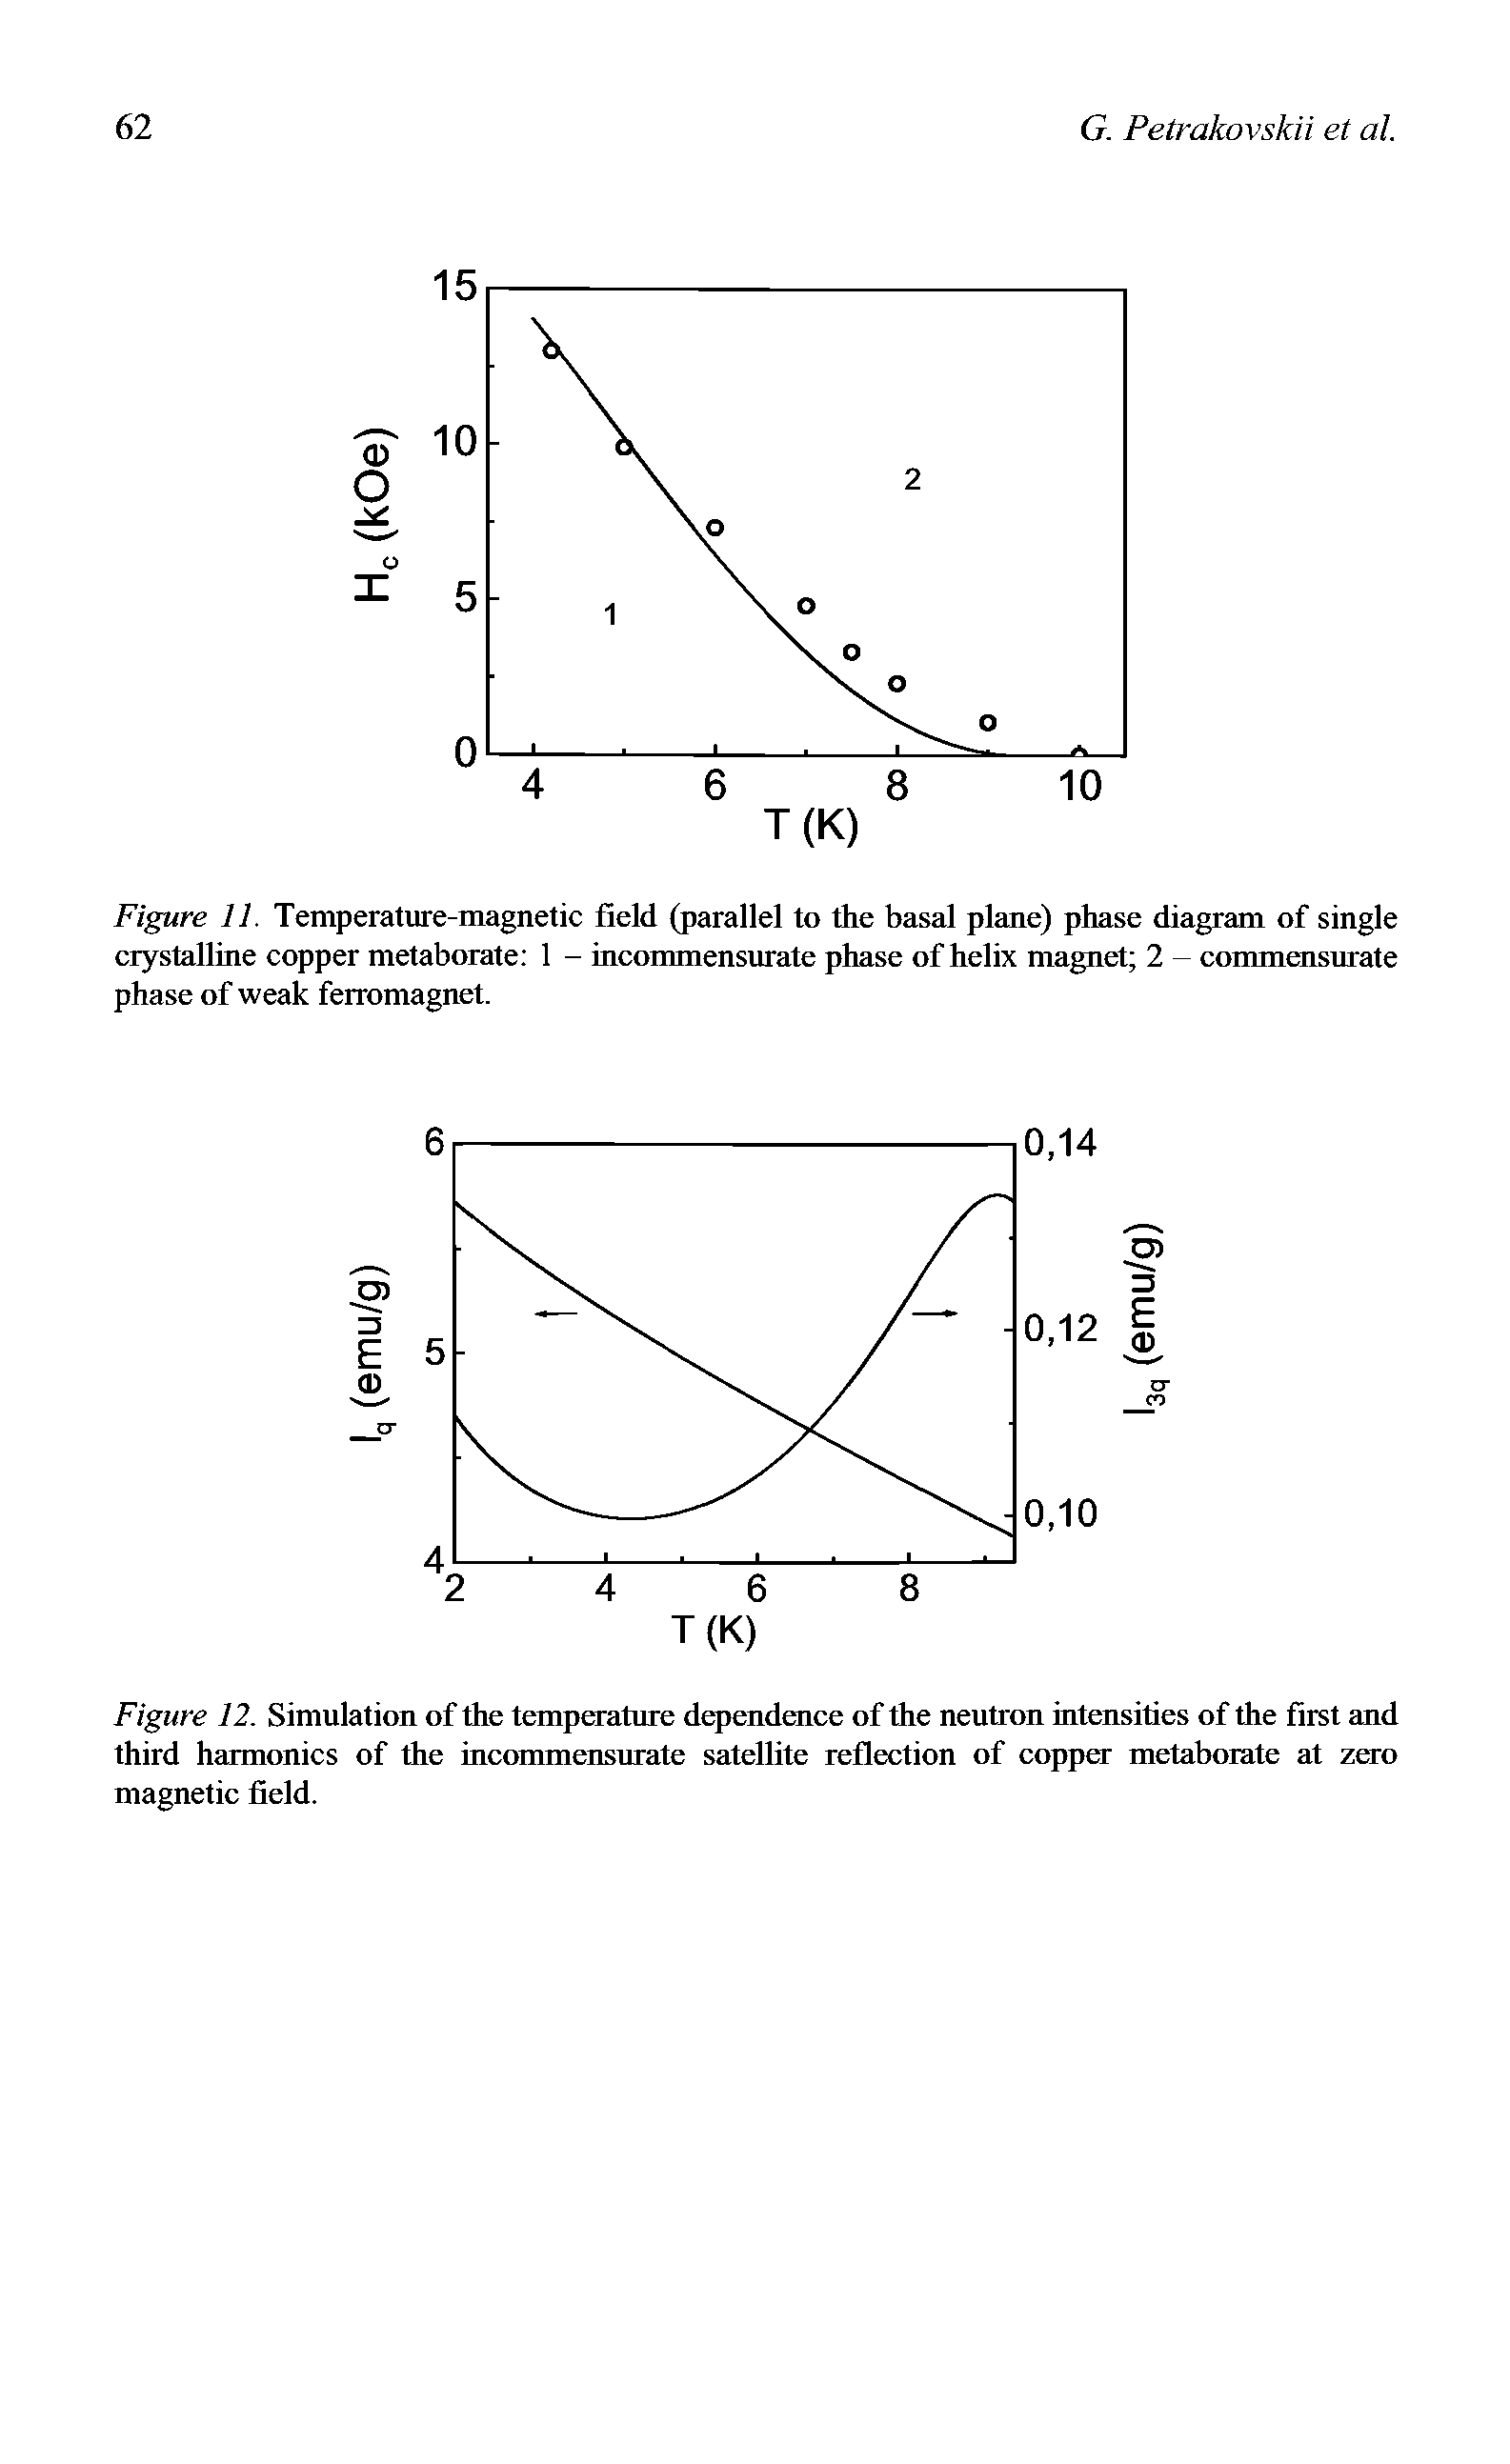 Figure 11. Temperature-magnetic field (parallel to the basal plane) phase diagram of single crystalline copper metaborate 1 - incommensurate phase of helix magnet 2 - commensurate phase of weak ferromagnet.